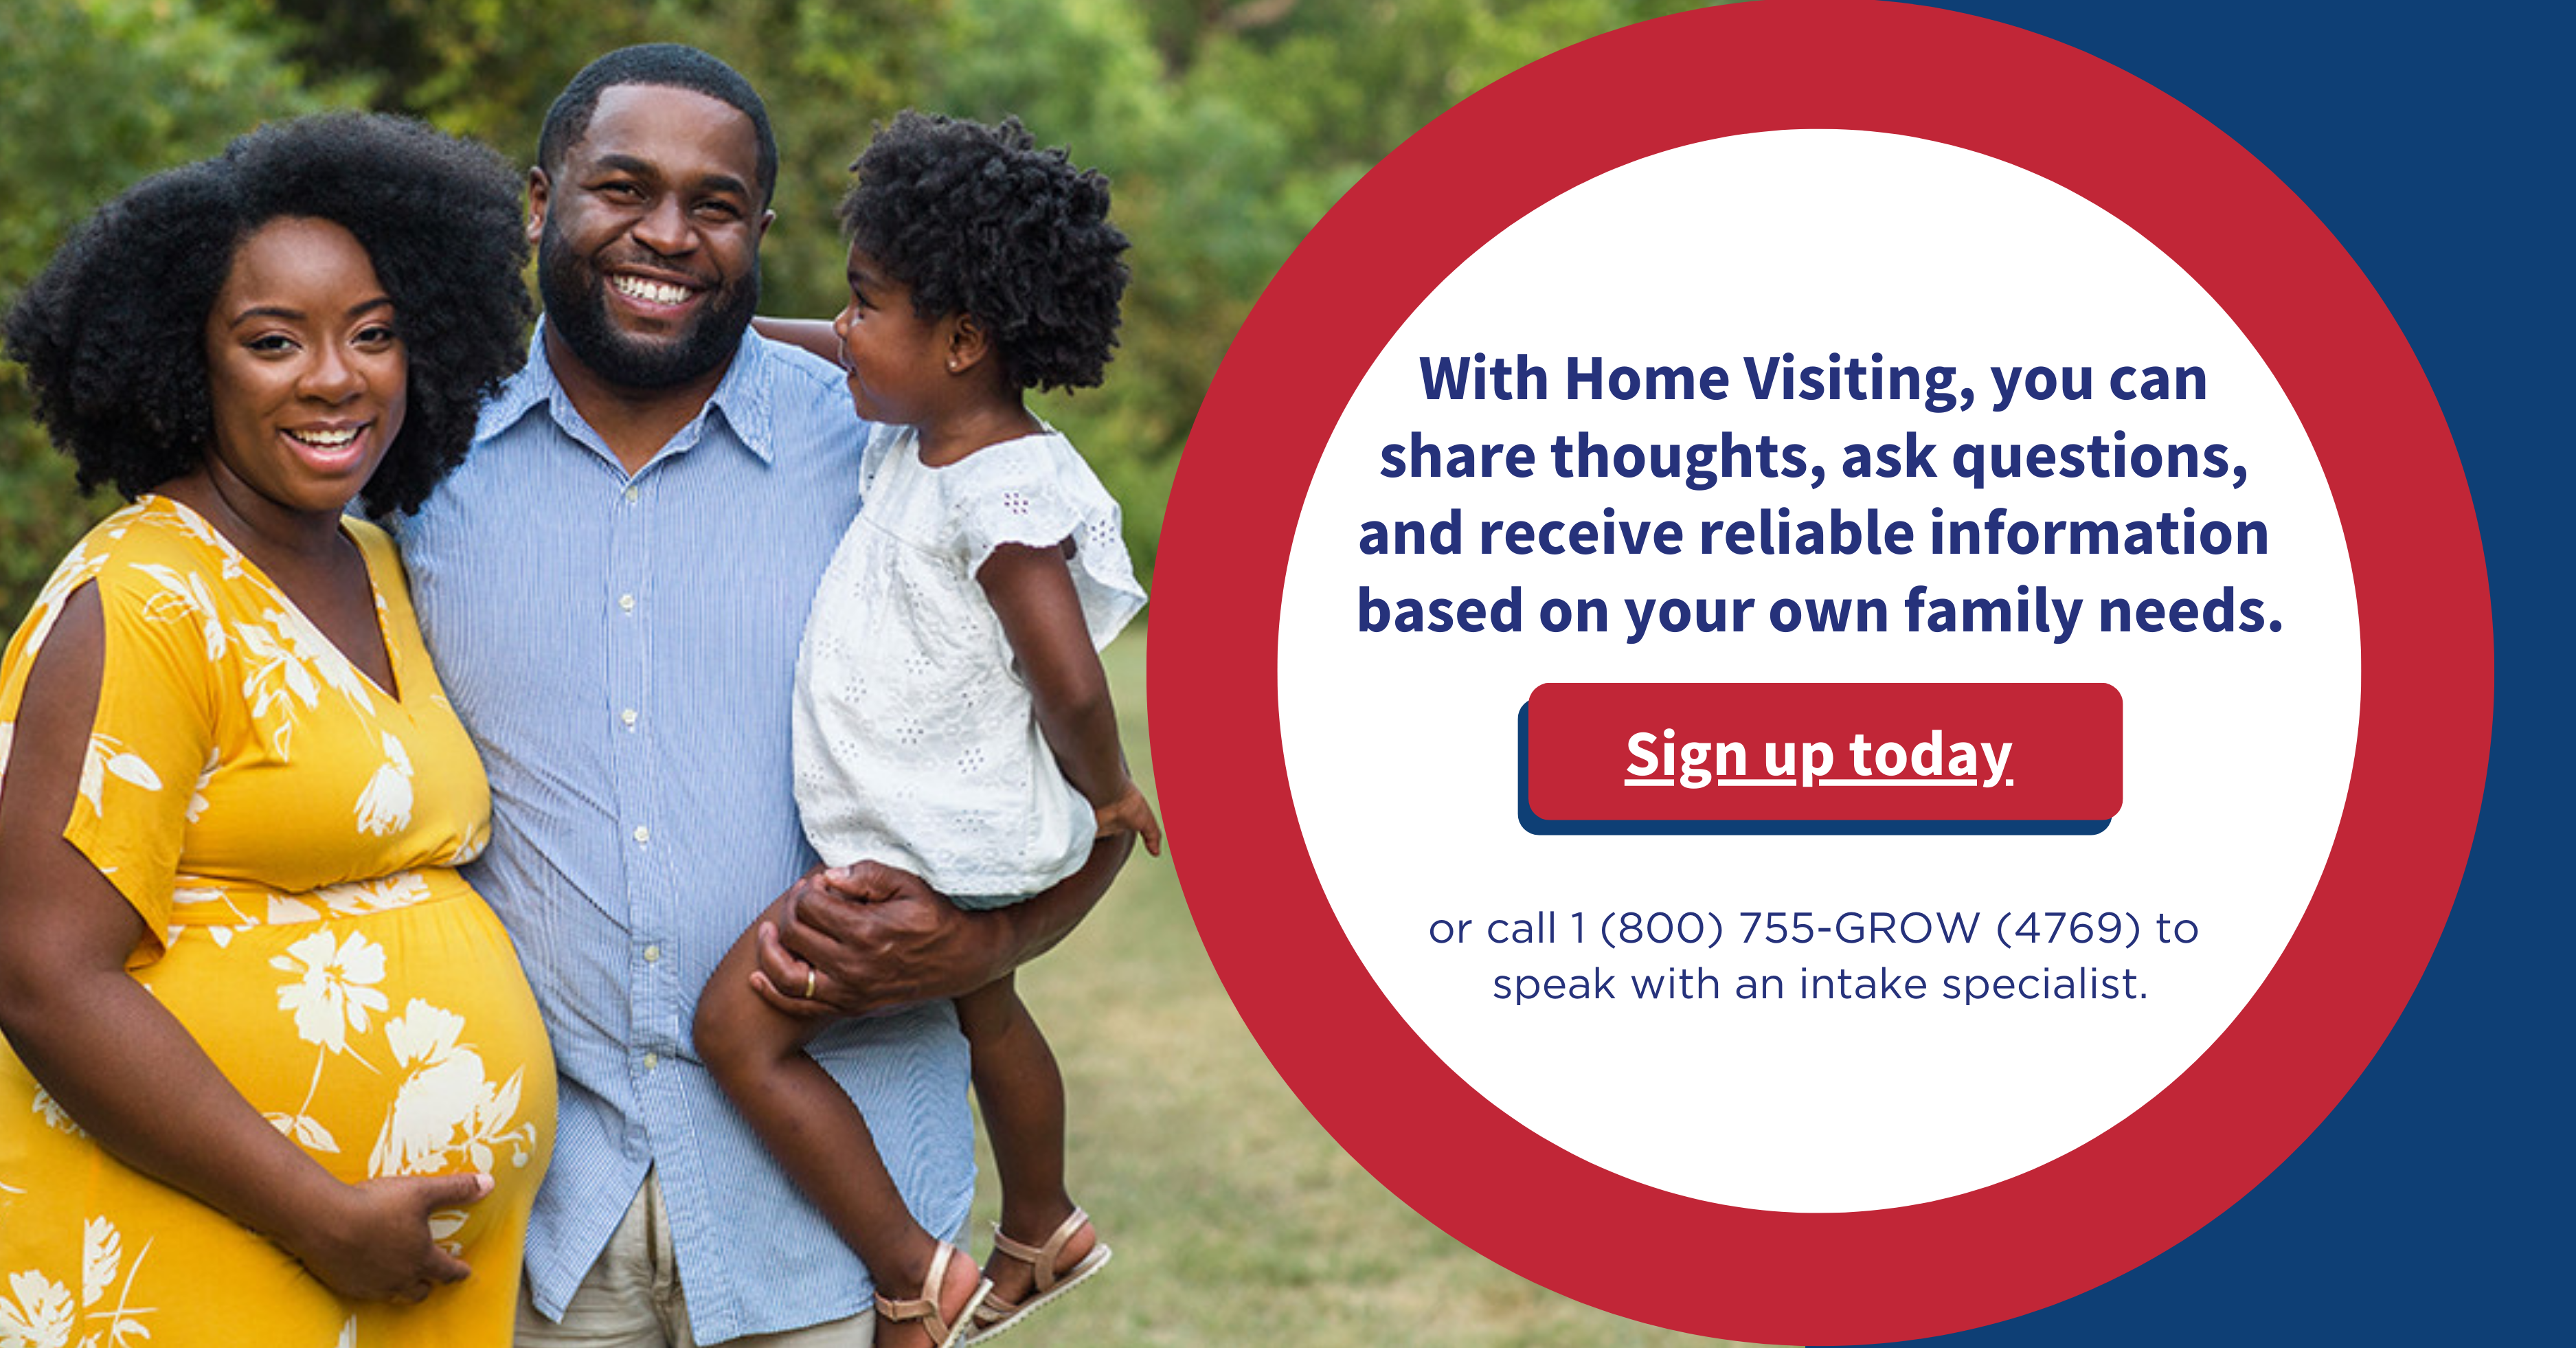 Sign up for Home Visiting